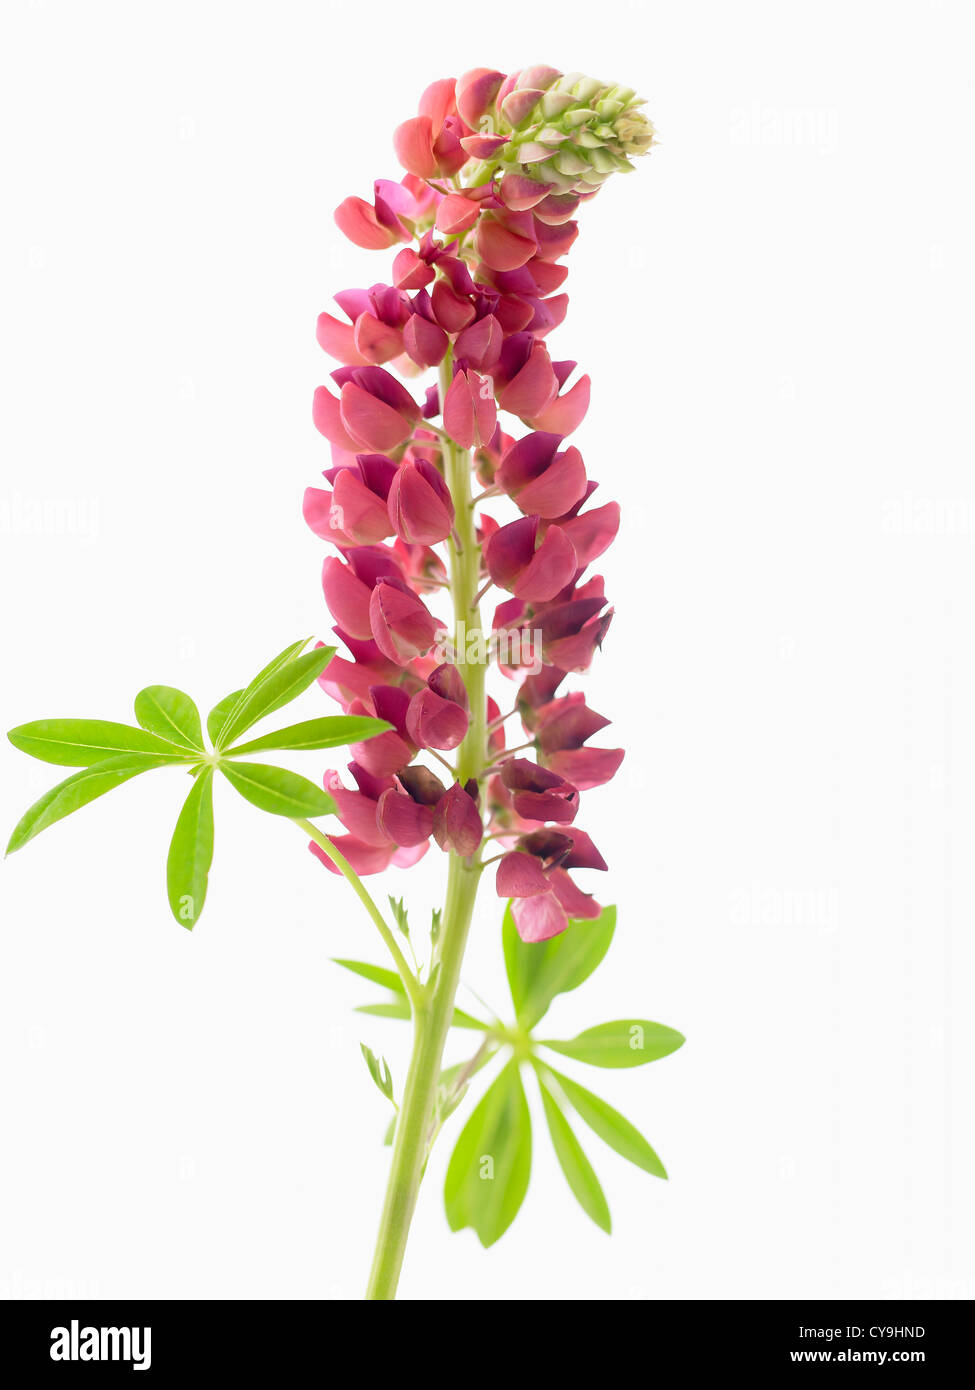 Lupinus polyphyllus, Lupin. Stem with purple red flowers against a white background Stock Photo